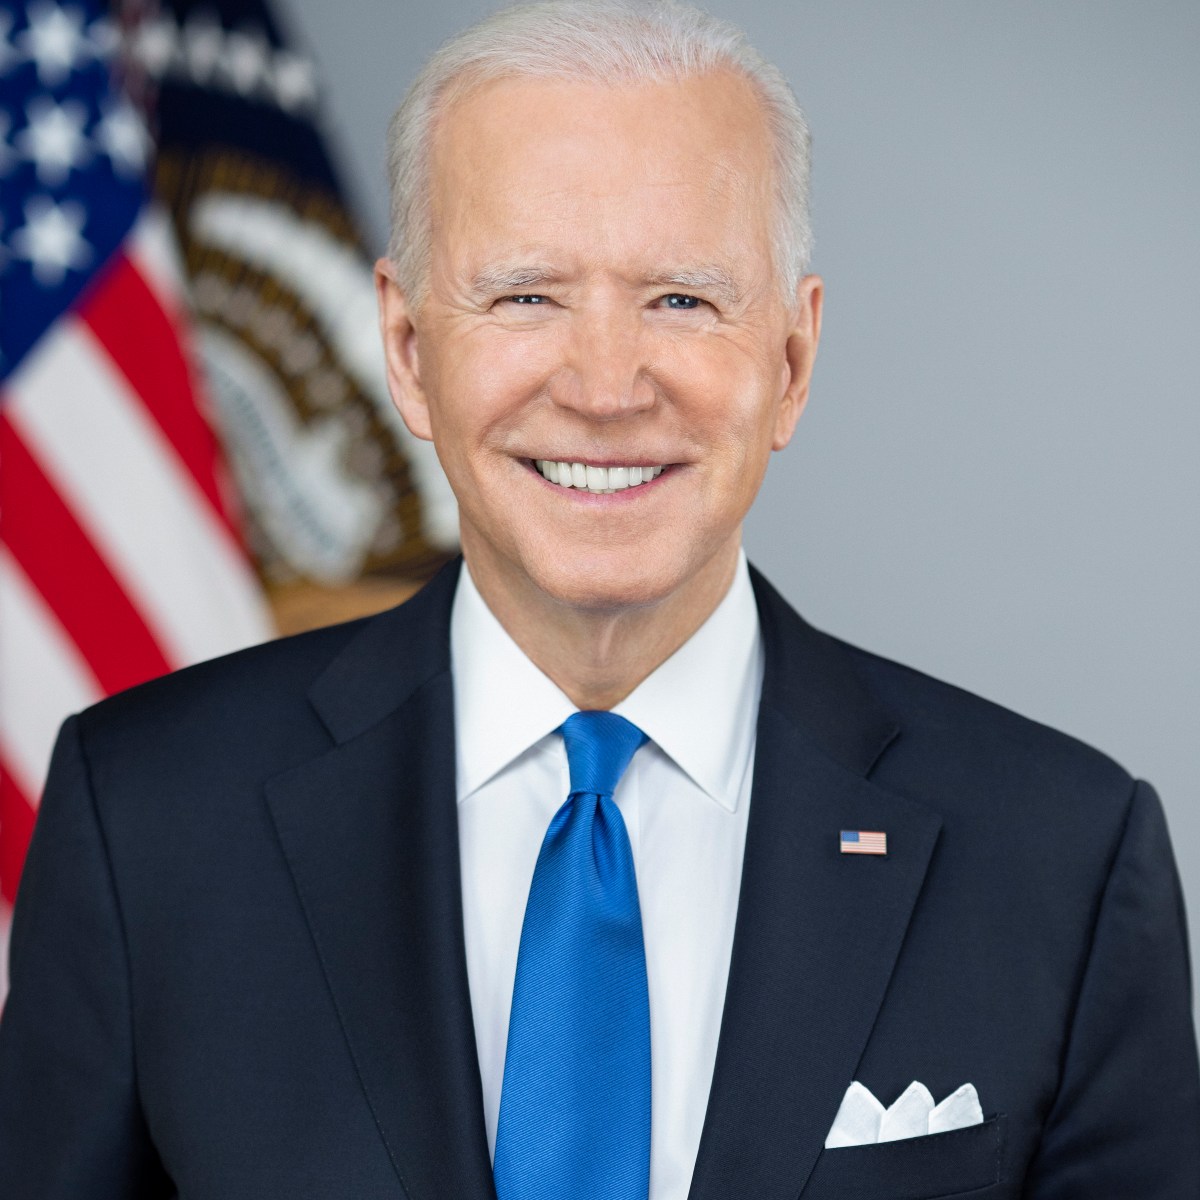 Biden: “A phenomenal negative psychological impact that CoViD has had on the public psyche” (2022)